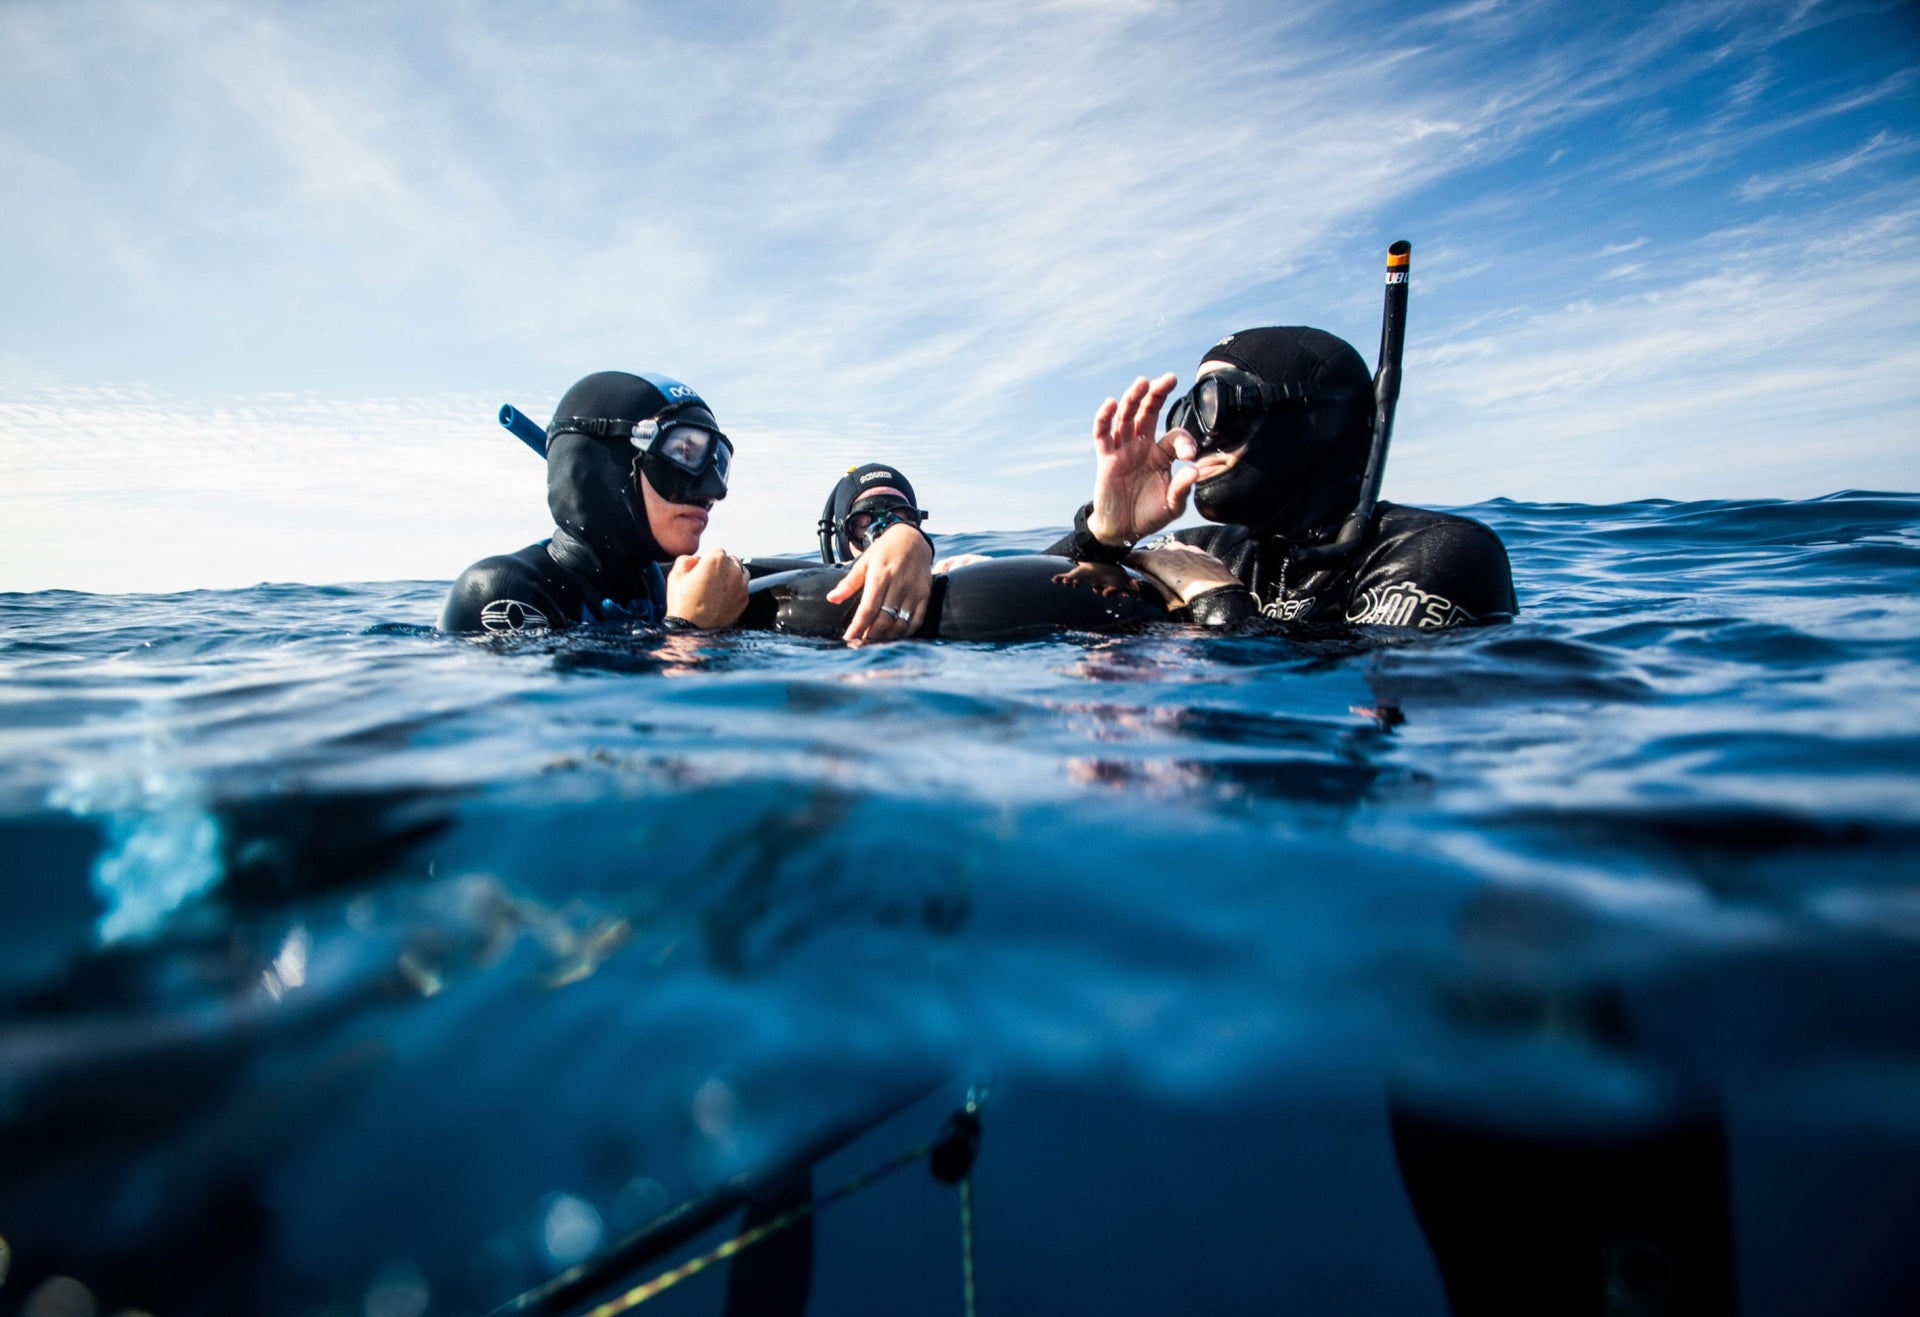 The Benefits of Taking a Basic Freediving Course